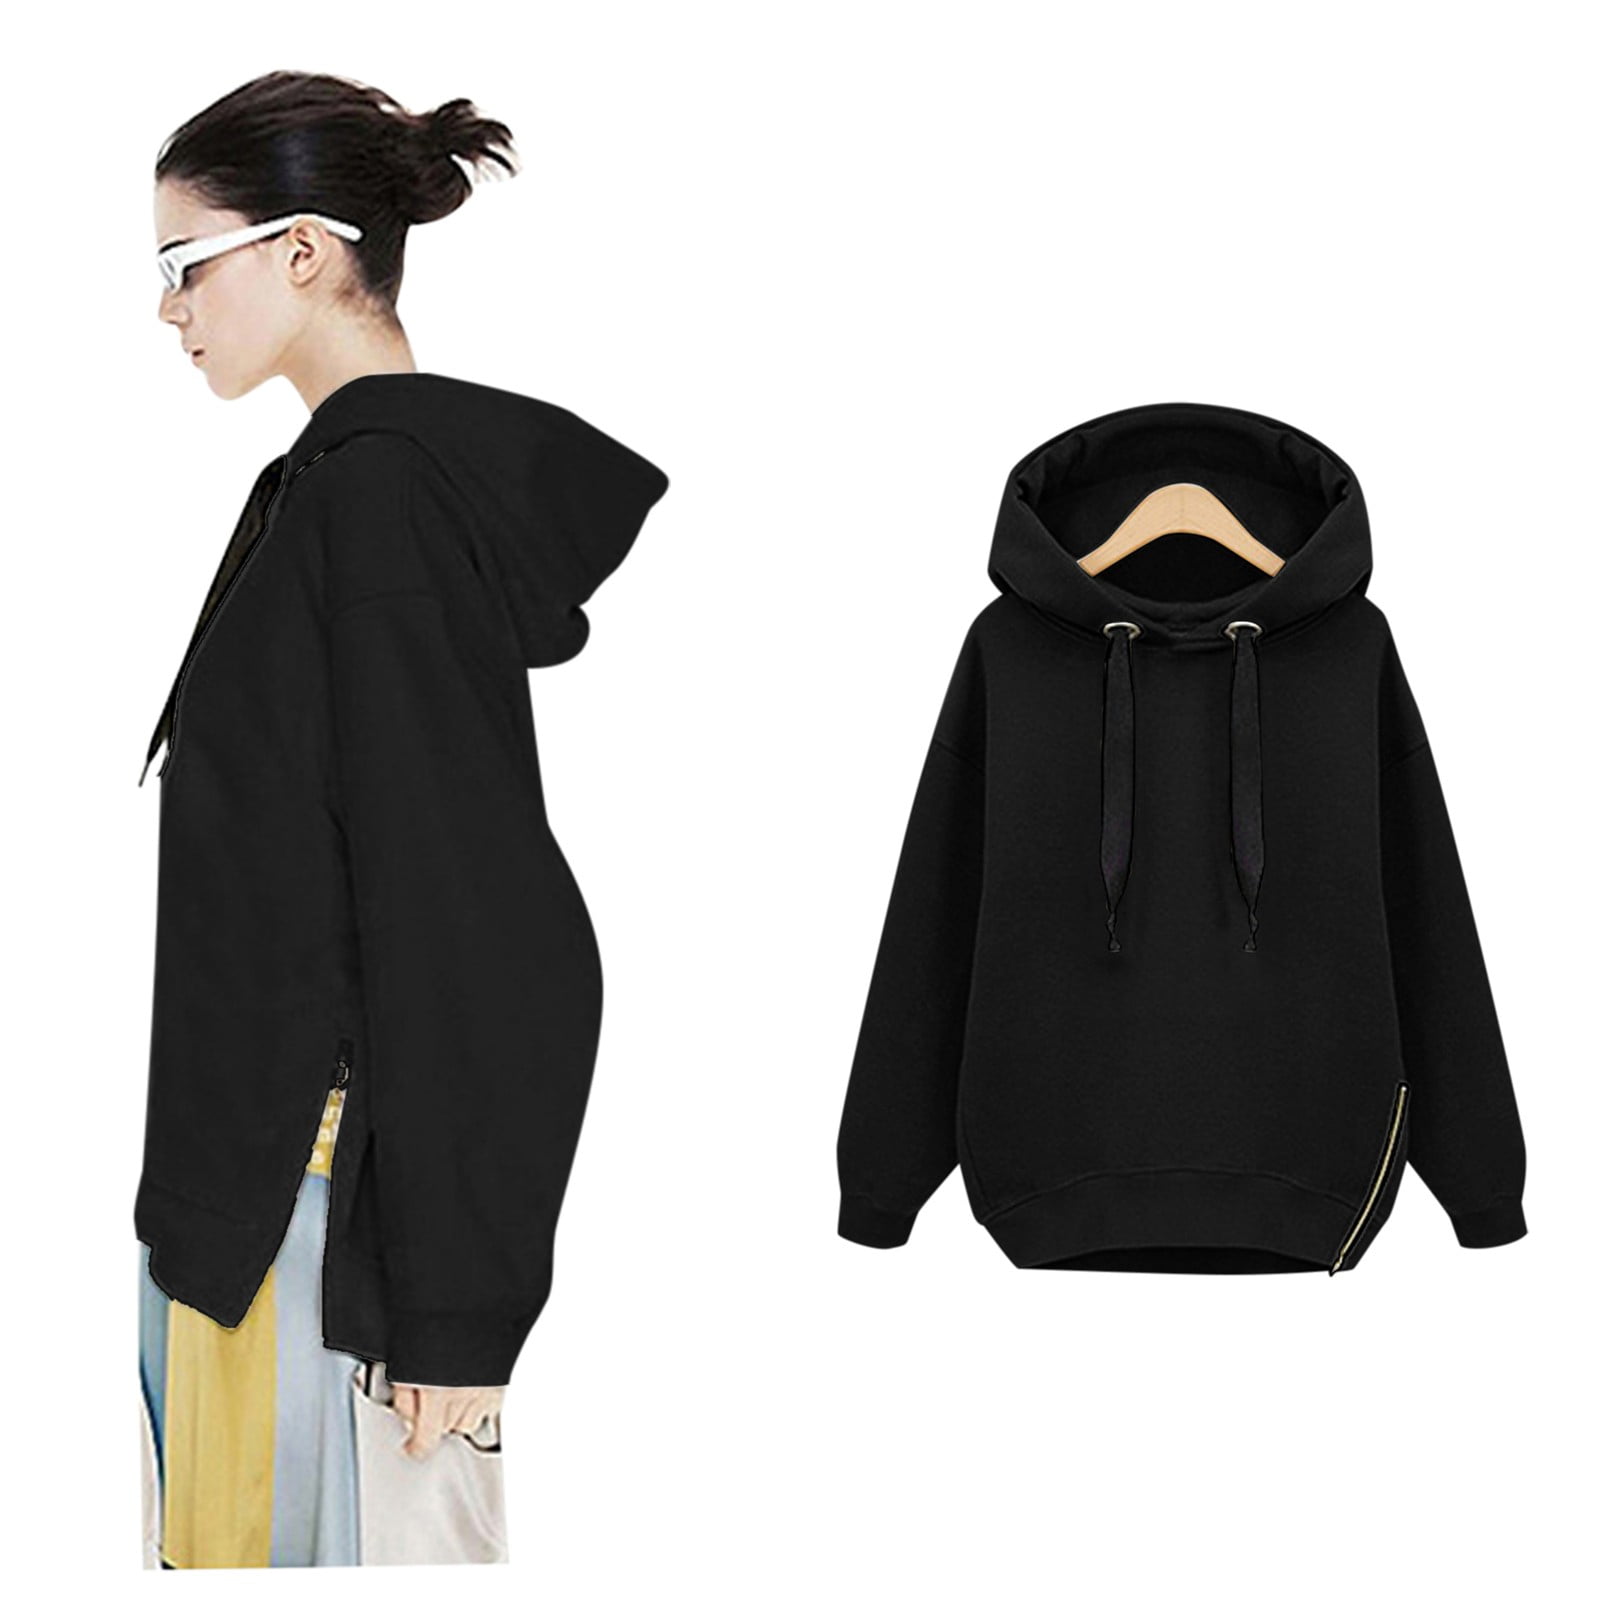 Womens Sweatshirts Hoodies Crewneck Oversized,summer dress sales today  clearance,womens casual tops clearance,black sexy tops for women,prime  clearance items today only,free items 0.00,hippie tops